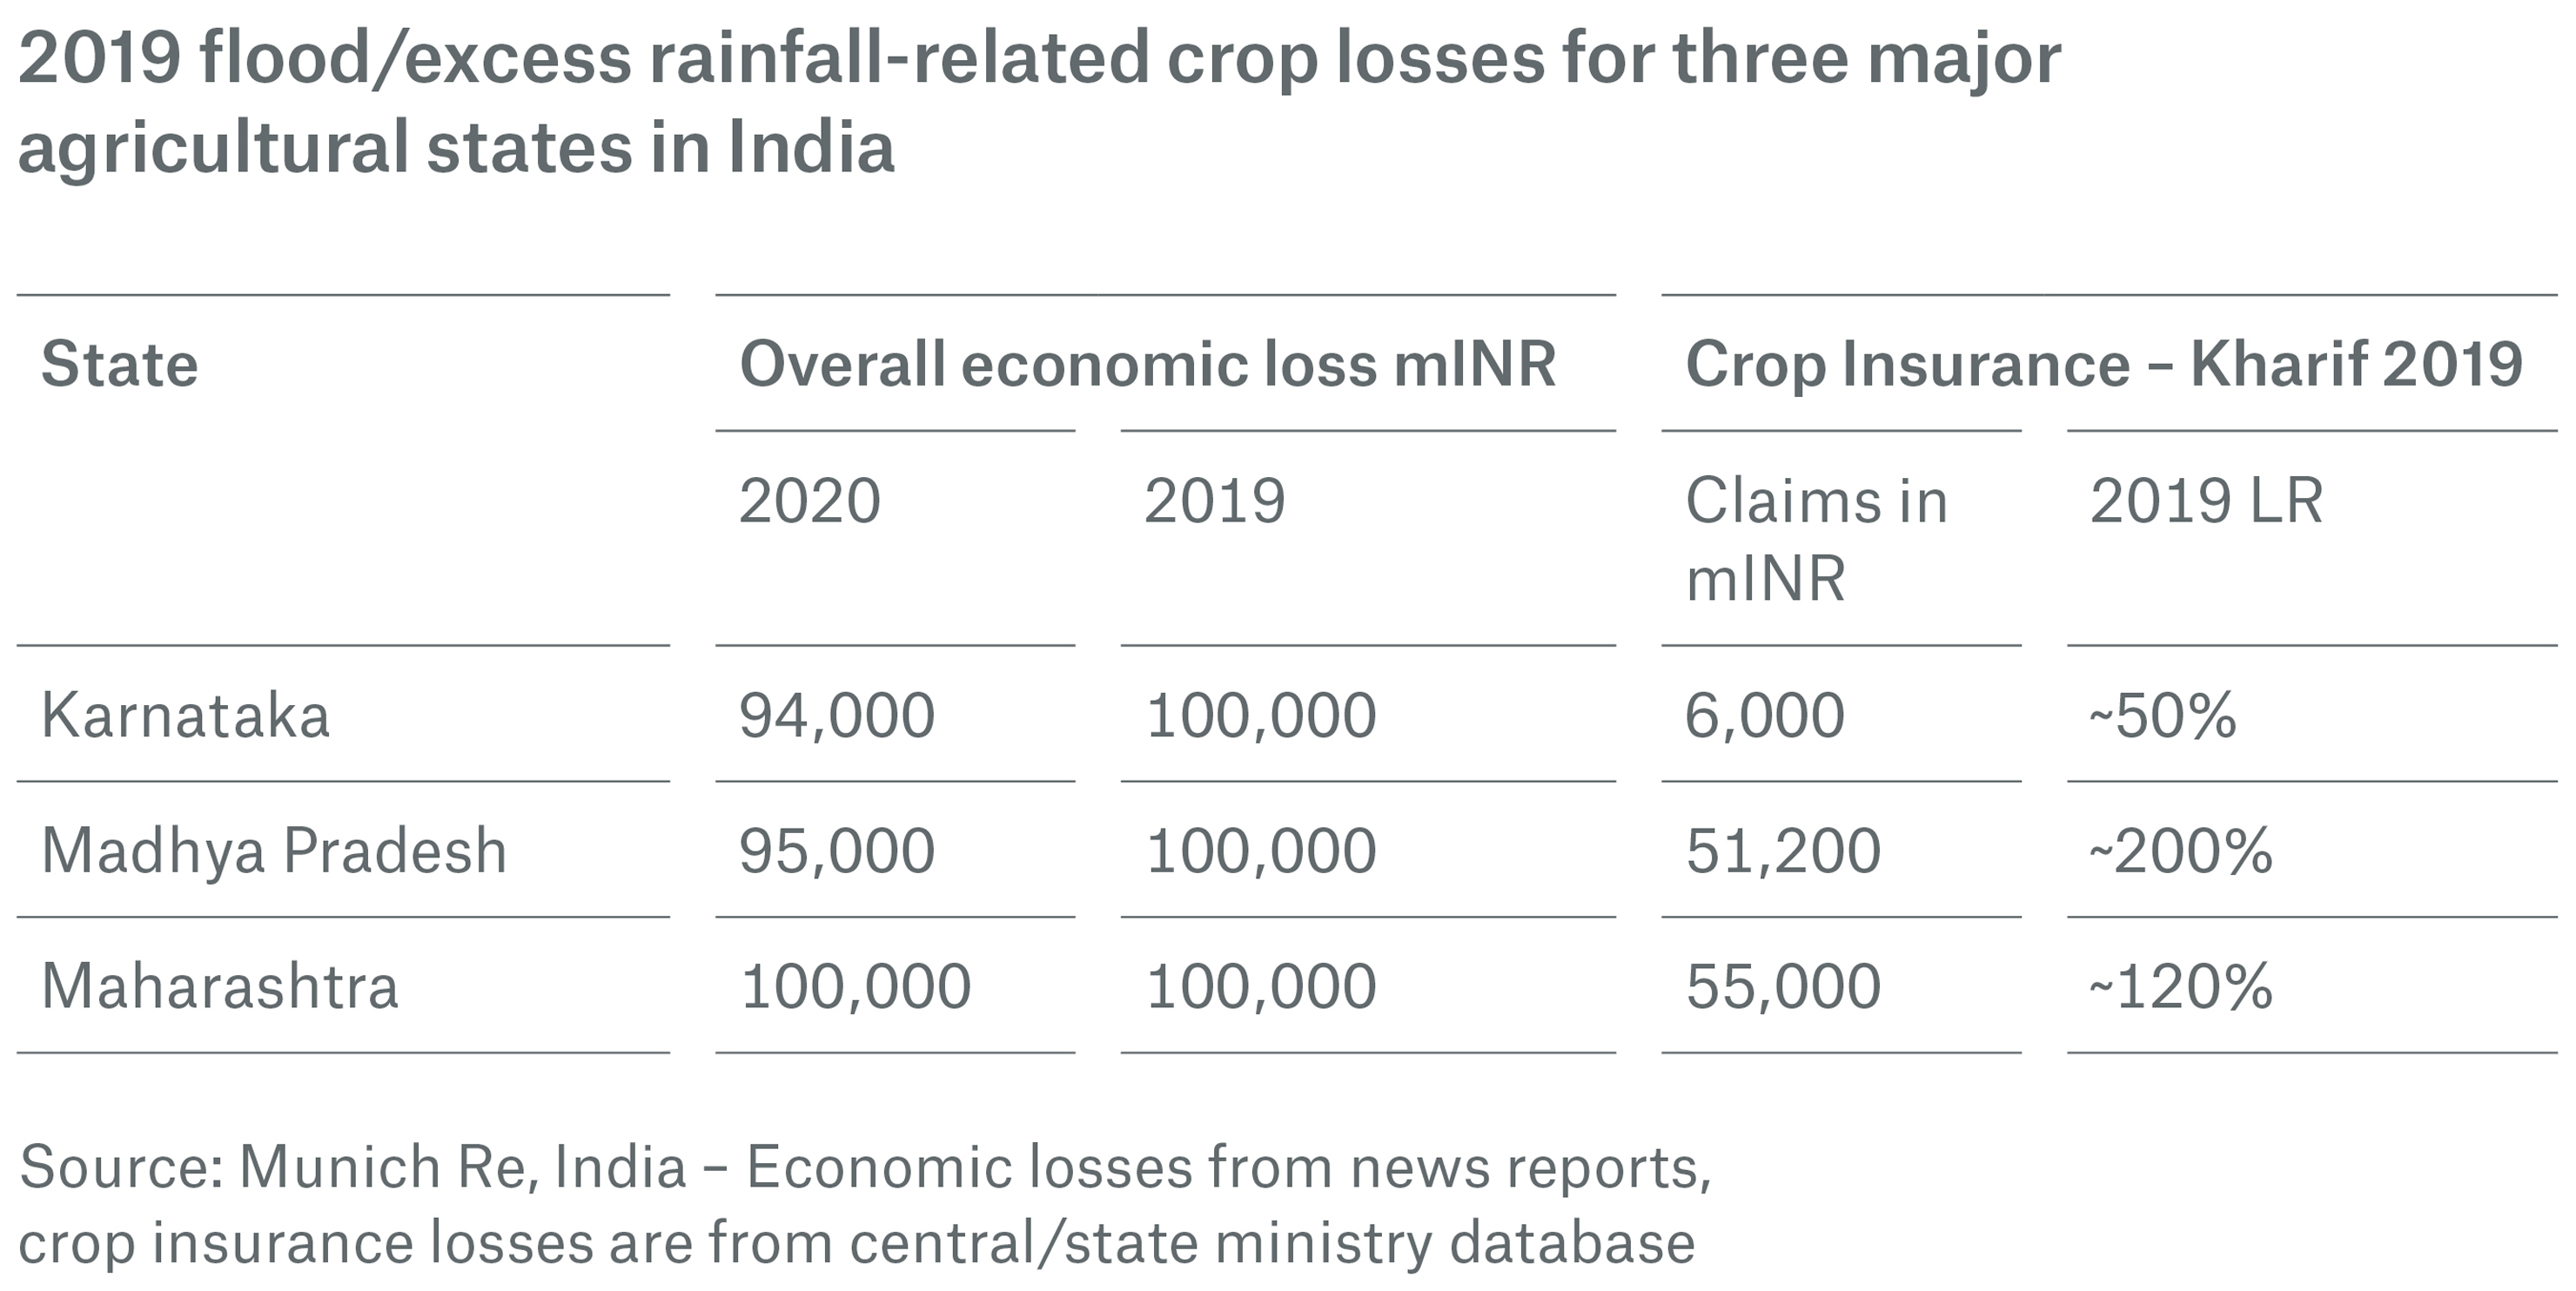 2019 flood/excess rainfall-related crop losses for three major agricultural states in India.